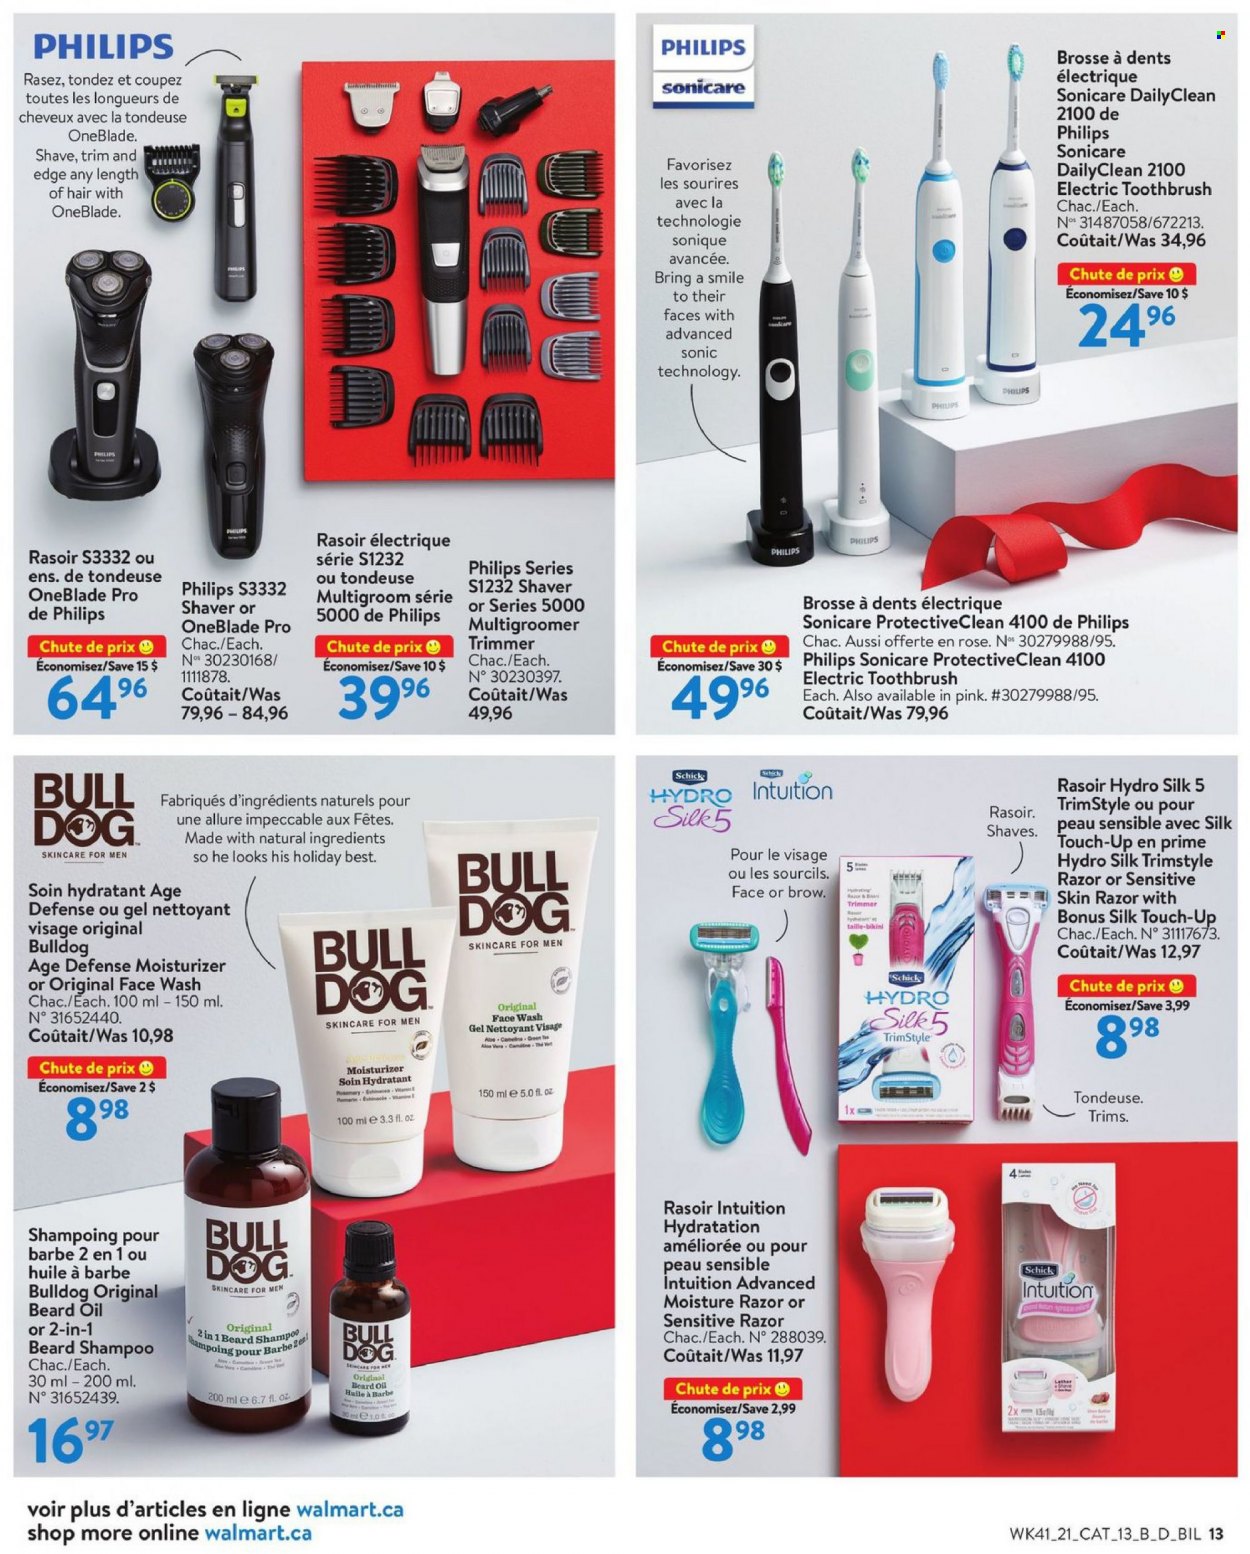 thumbnail - Walmart Flyer - November 04, 2021 - December 01, 2021 - Sales products - Philips, Silk, rosemary, wine, rosé wine, face gel, toothbrush, moisturizer, beard oil, Schick, shaver, trimmer, electric toothbrush, Sonicare, rose, bikini, shampoo. Page 14.